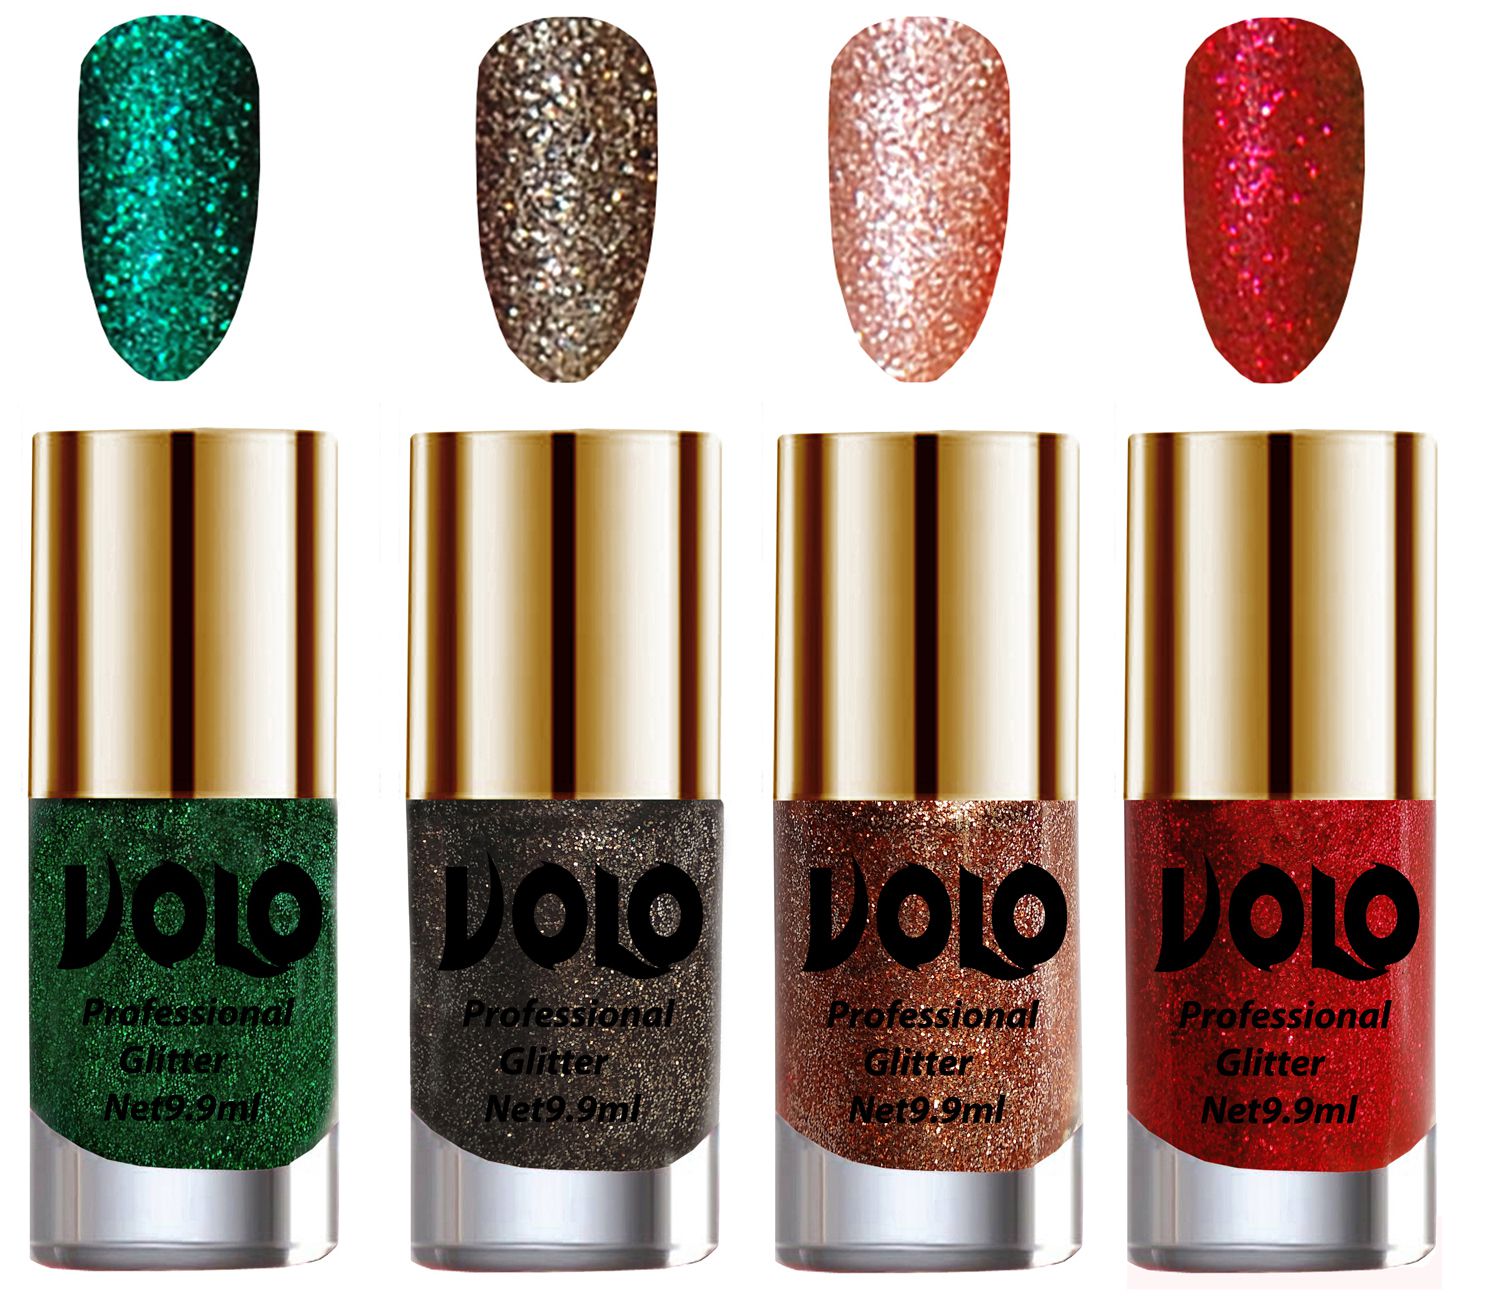     			VOLO Professionally Used Glitter Shine Nail Polish Green,Grey,Peach Red Pack of 4 39 mL